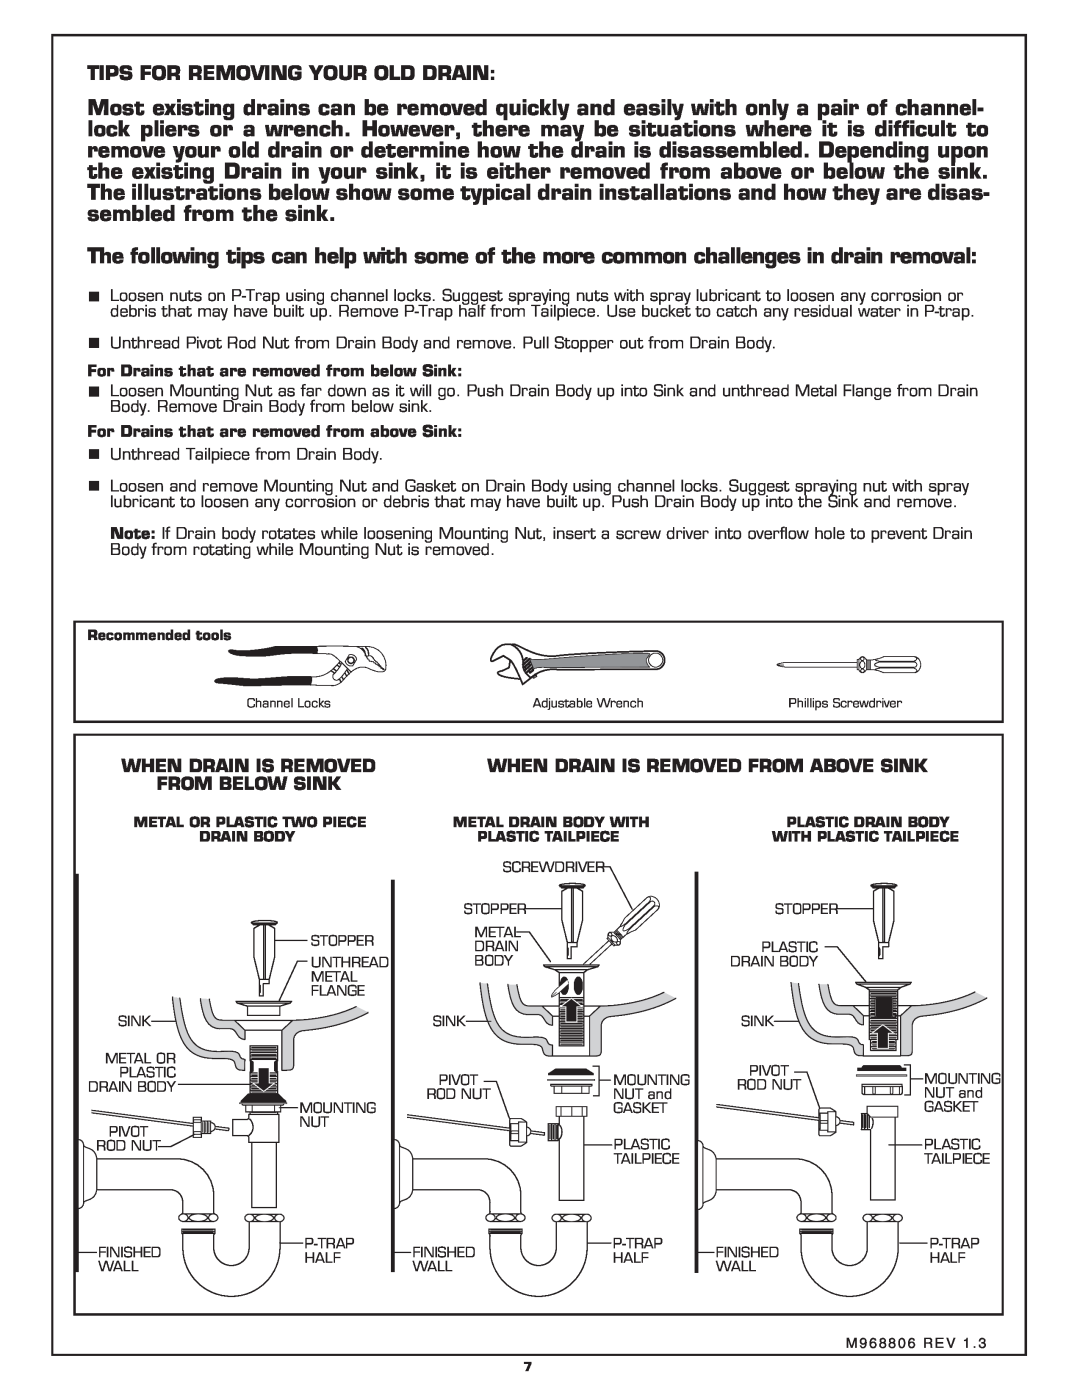 American Standard 4504S Tips For Removing Your Old Drain, When Drain Is Removed From Above Sink, From Below Sink 